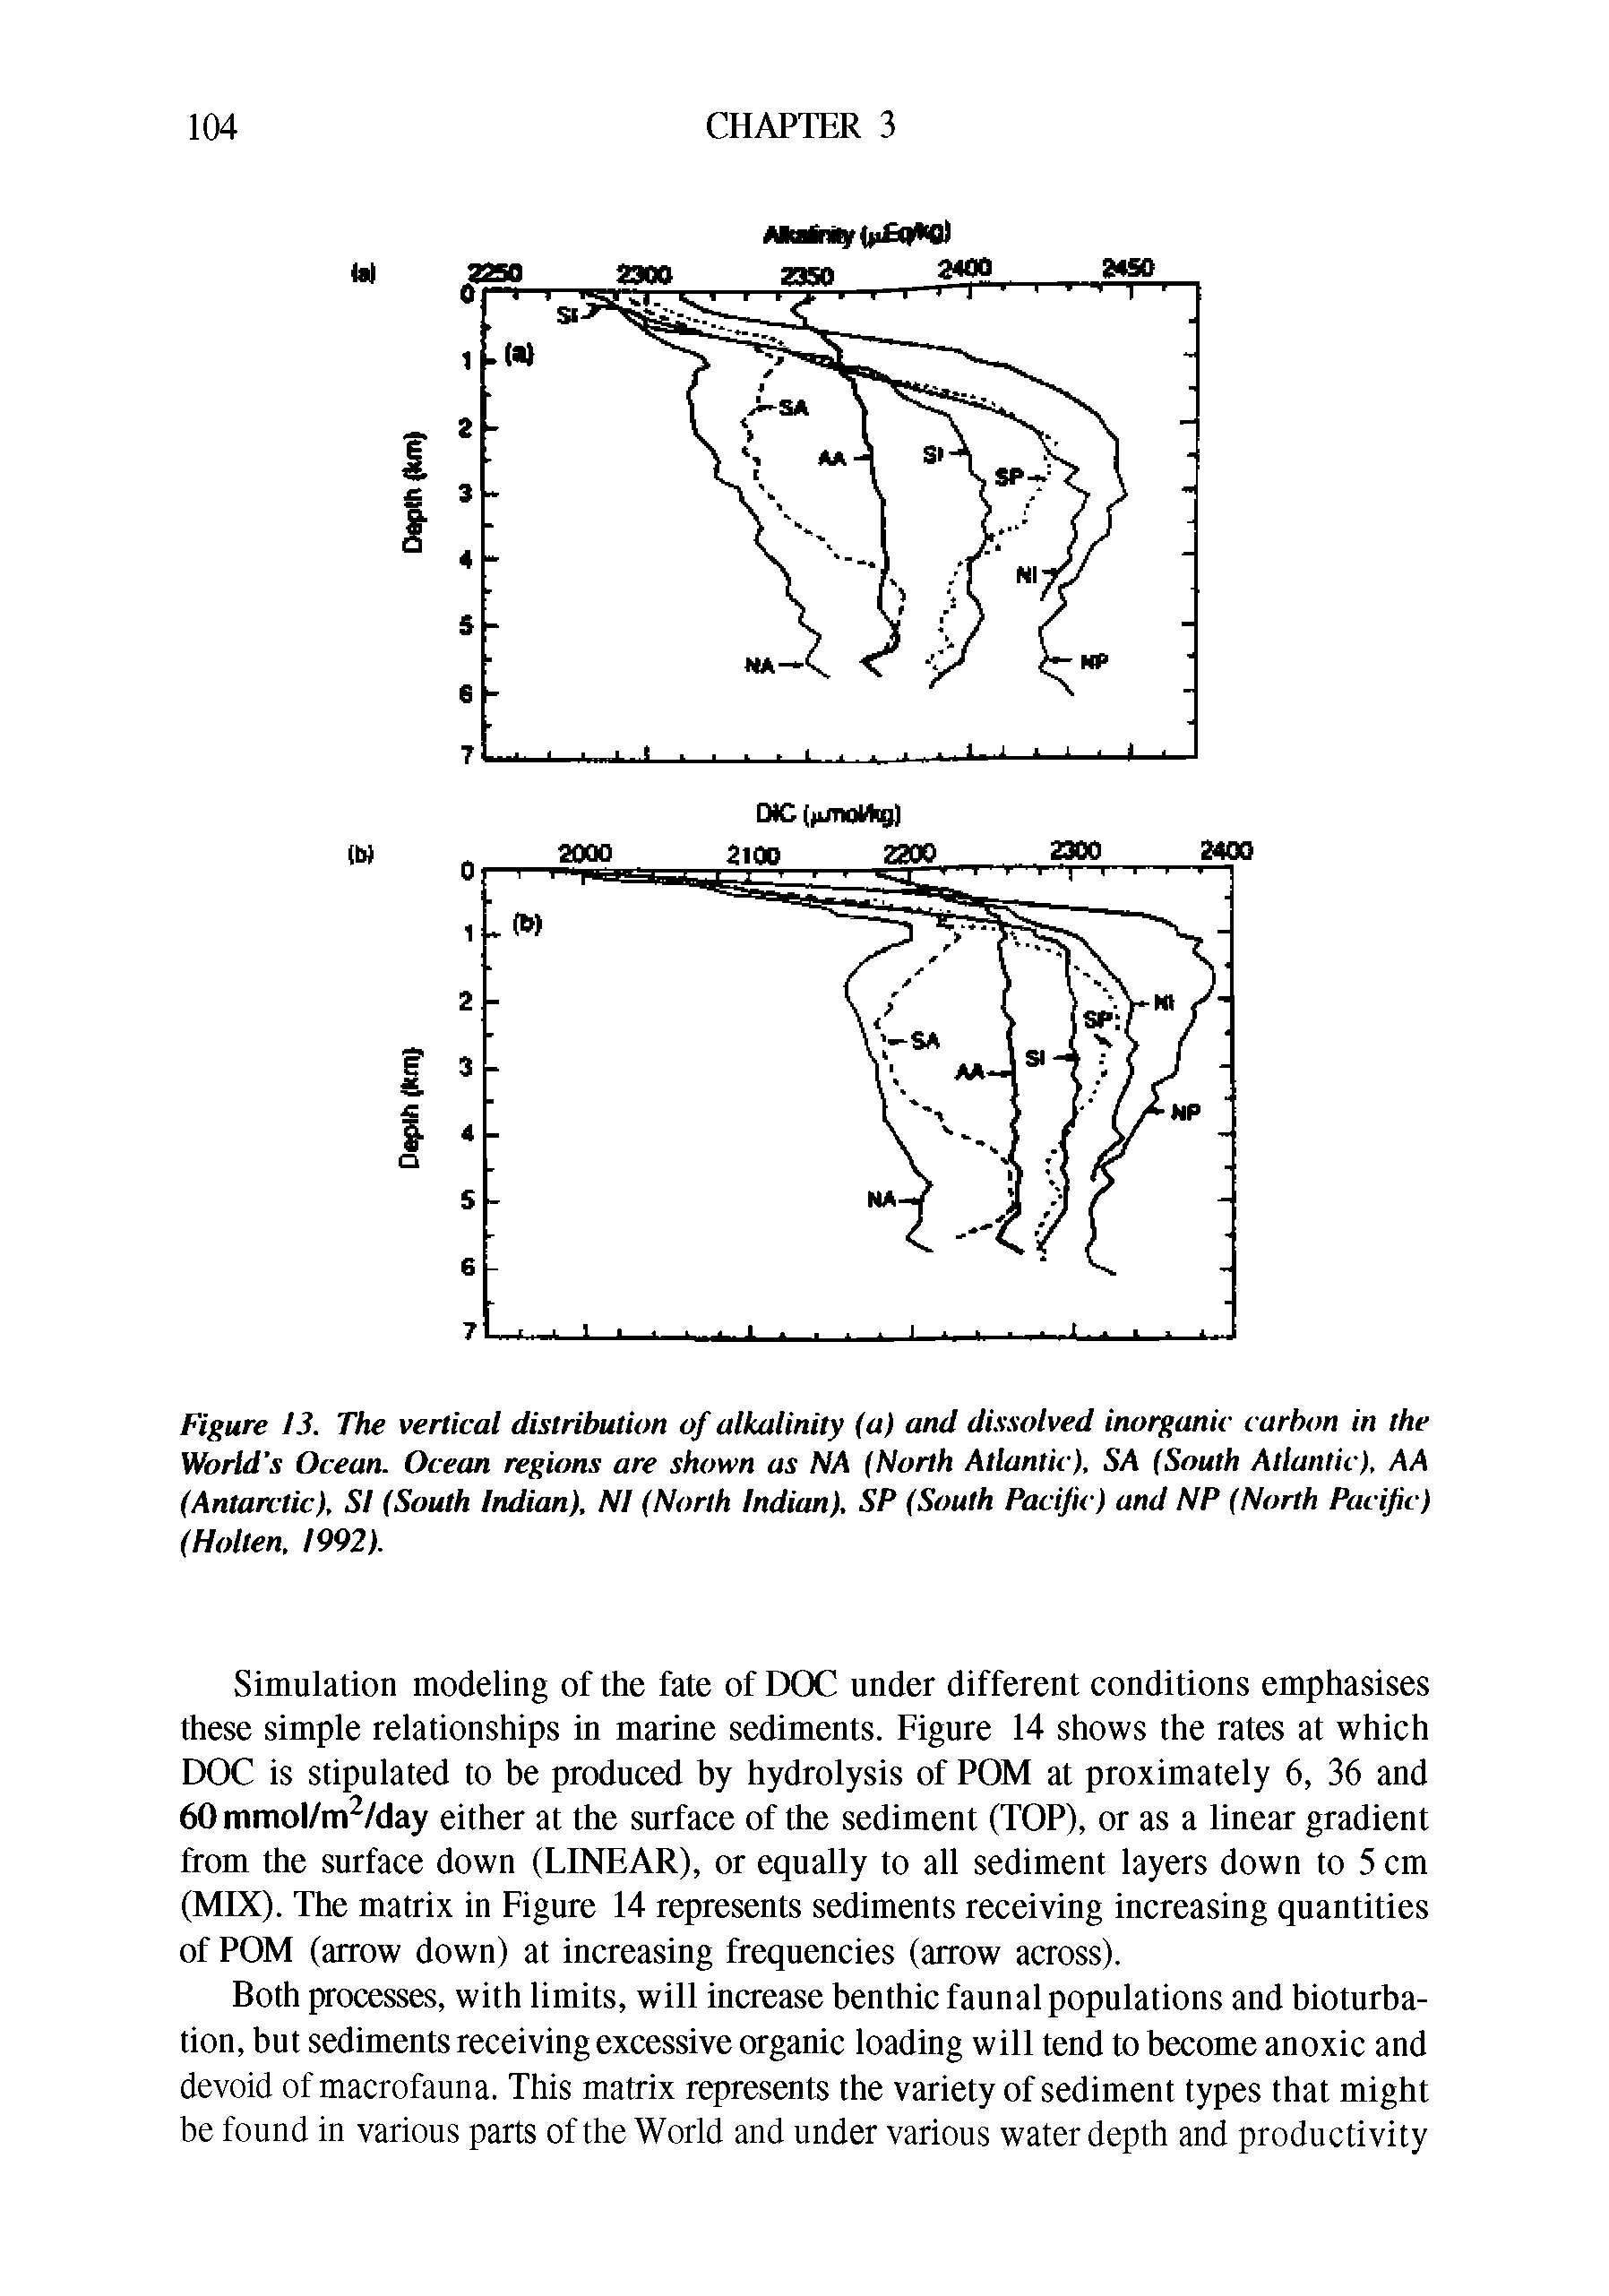 Figure 13. The vertical distribution of alkalinity (a) and dissolved inorganic carbon in the World s Ocean. Ocean regions are shown as NA (North Atlantic), SA (South Atlantic), AA (Antarctic). SI (South Indian), Nl (North Indian), SP (South Pacific) and NP (North Pacific) (Molten, 1992).